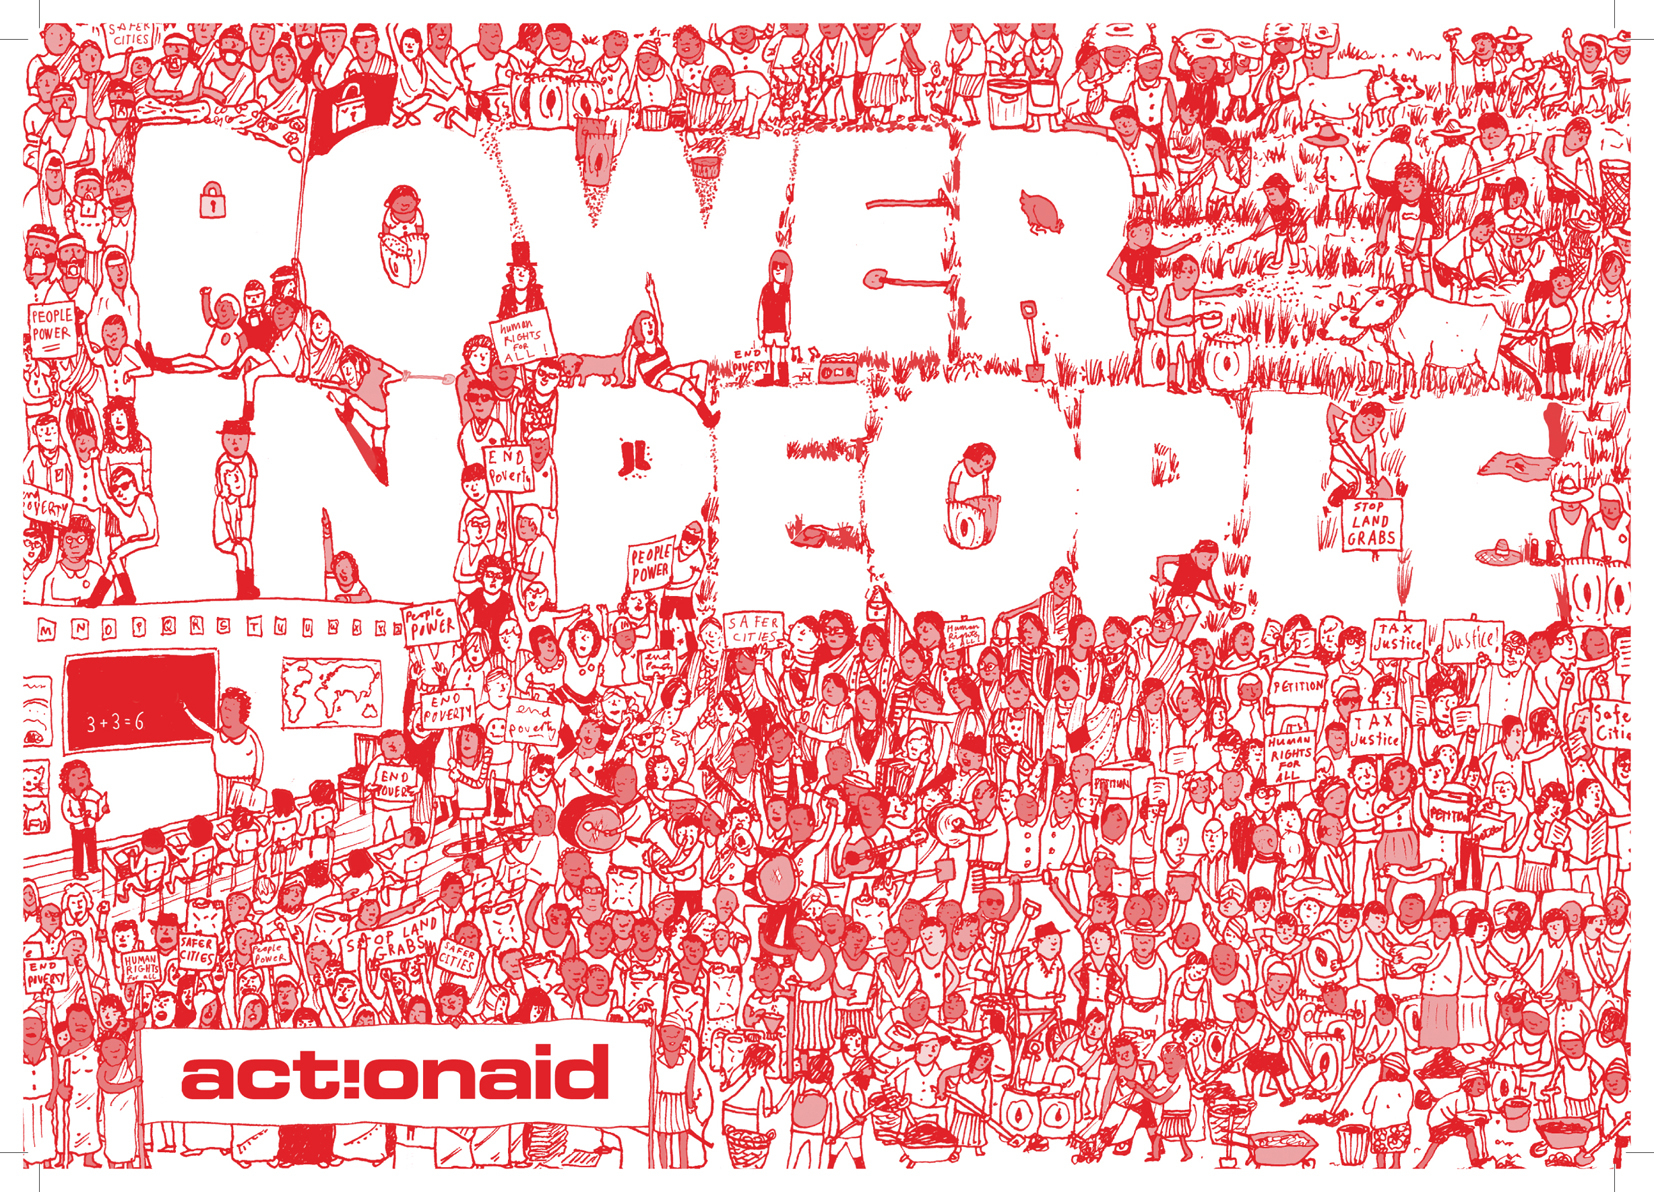 Action Aid Power In People